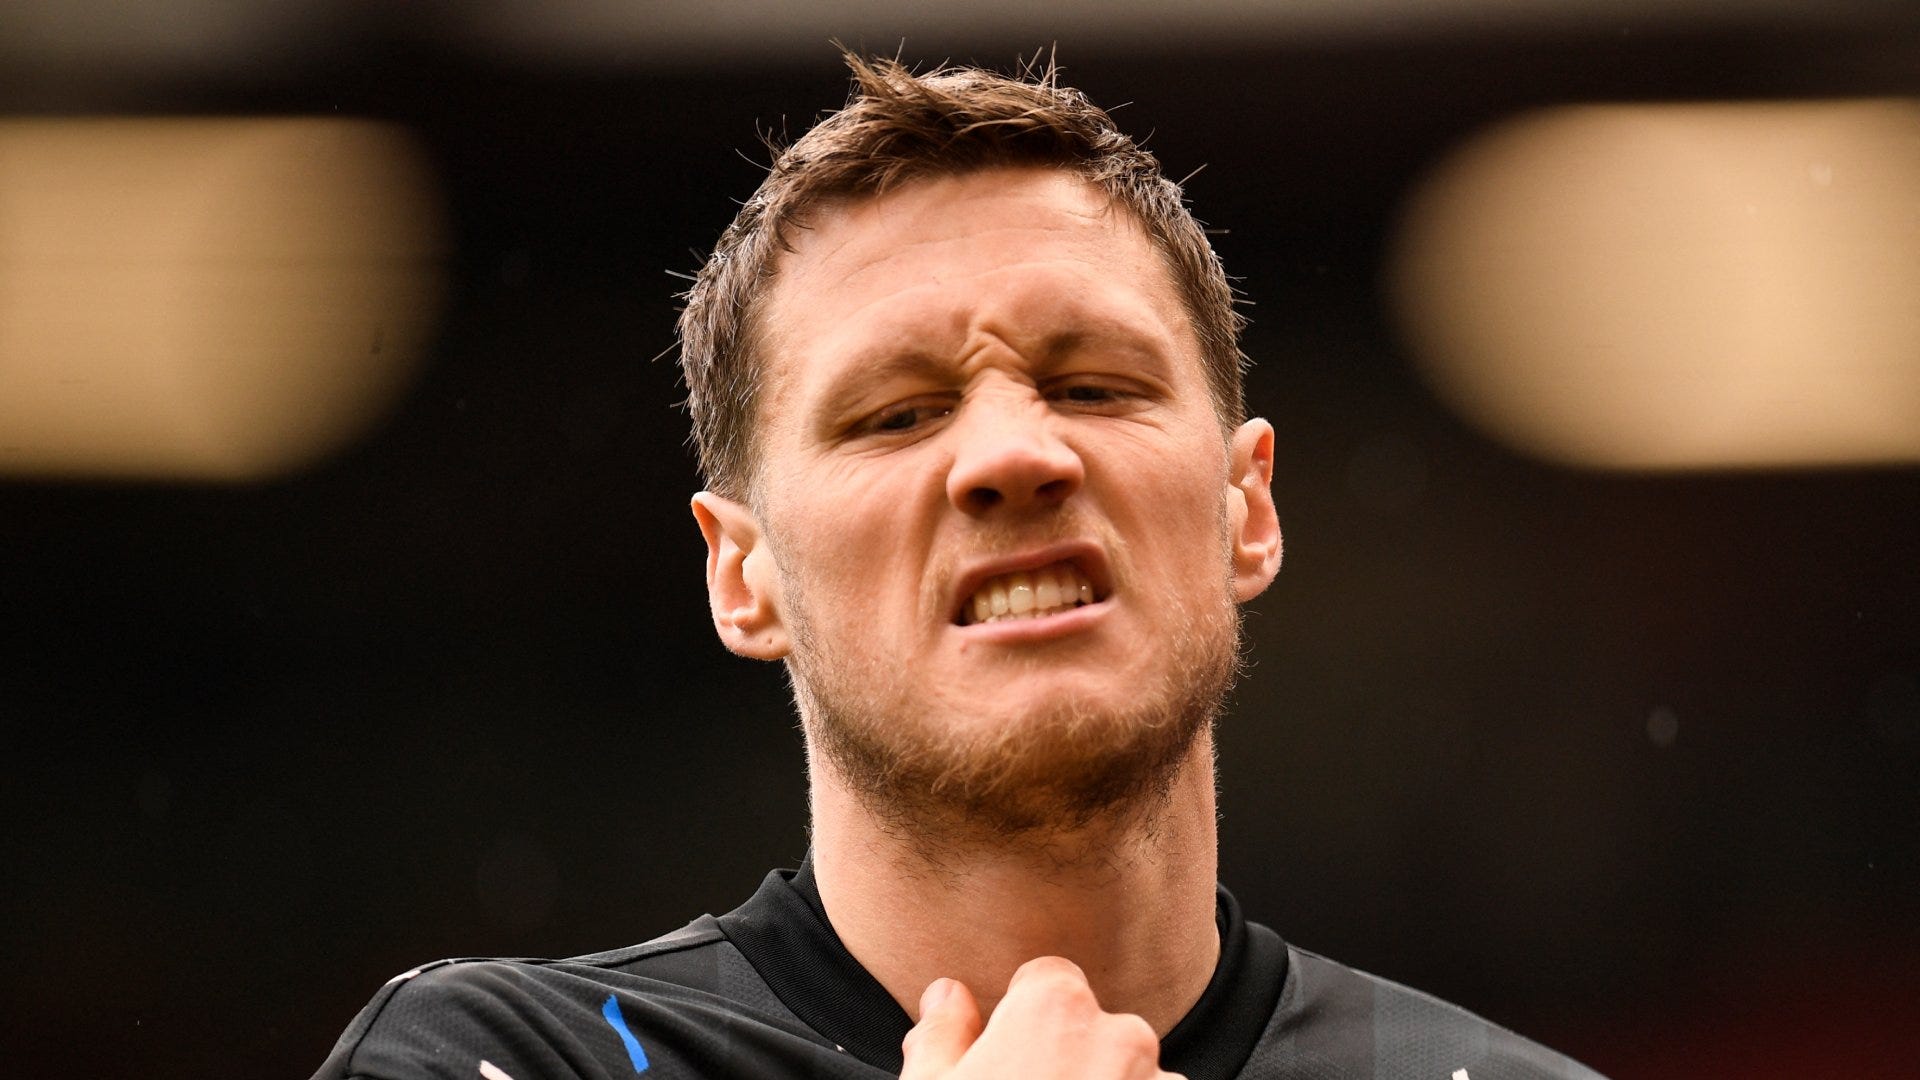 wout-weghorst-admits-two-goals-is-not-enough-as-he-reflects-on-man-utd-spell-but-hints-he-s-saved-his-best-for-fa-cup-final-against-man-city-or-goal-com-india